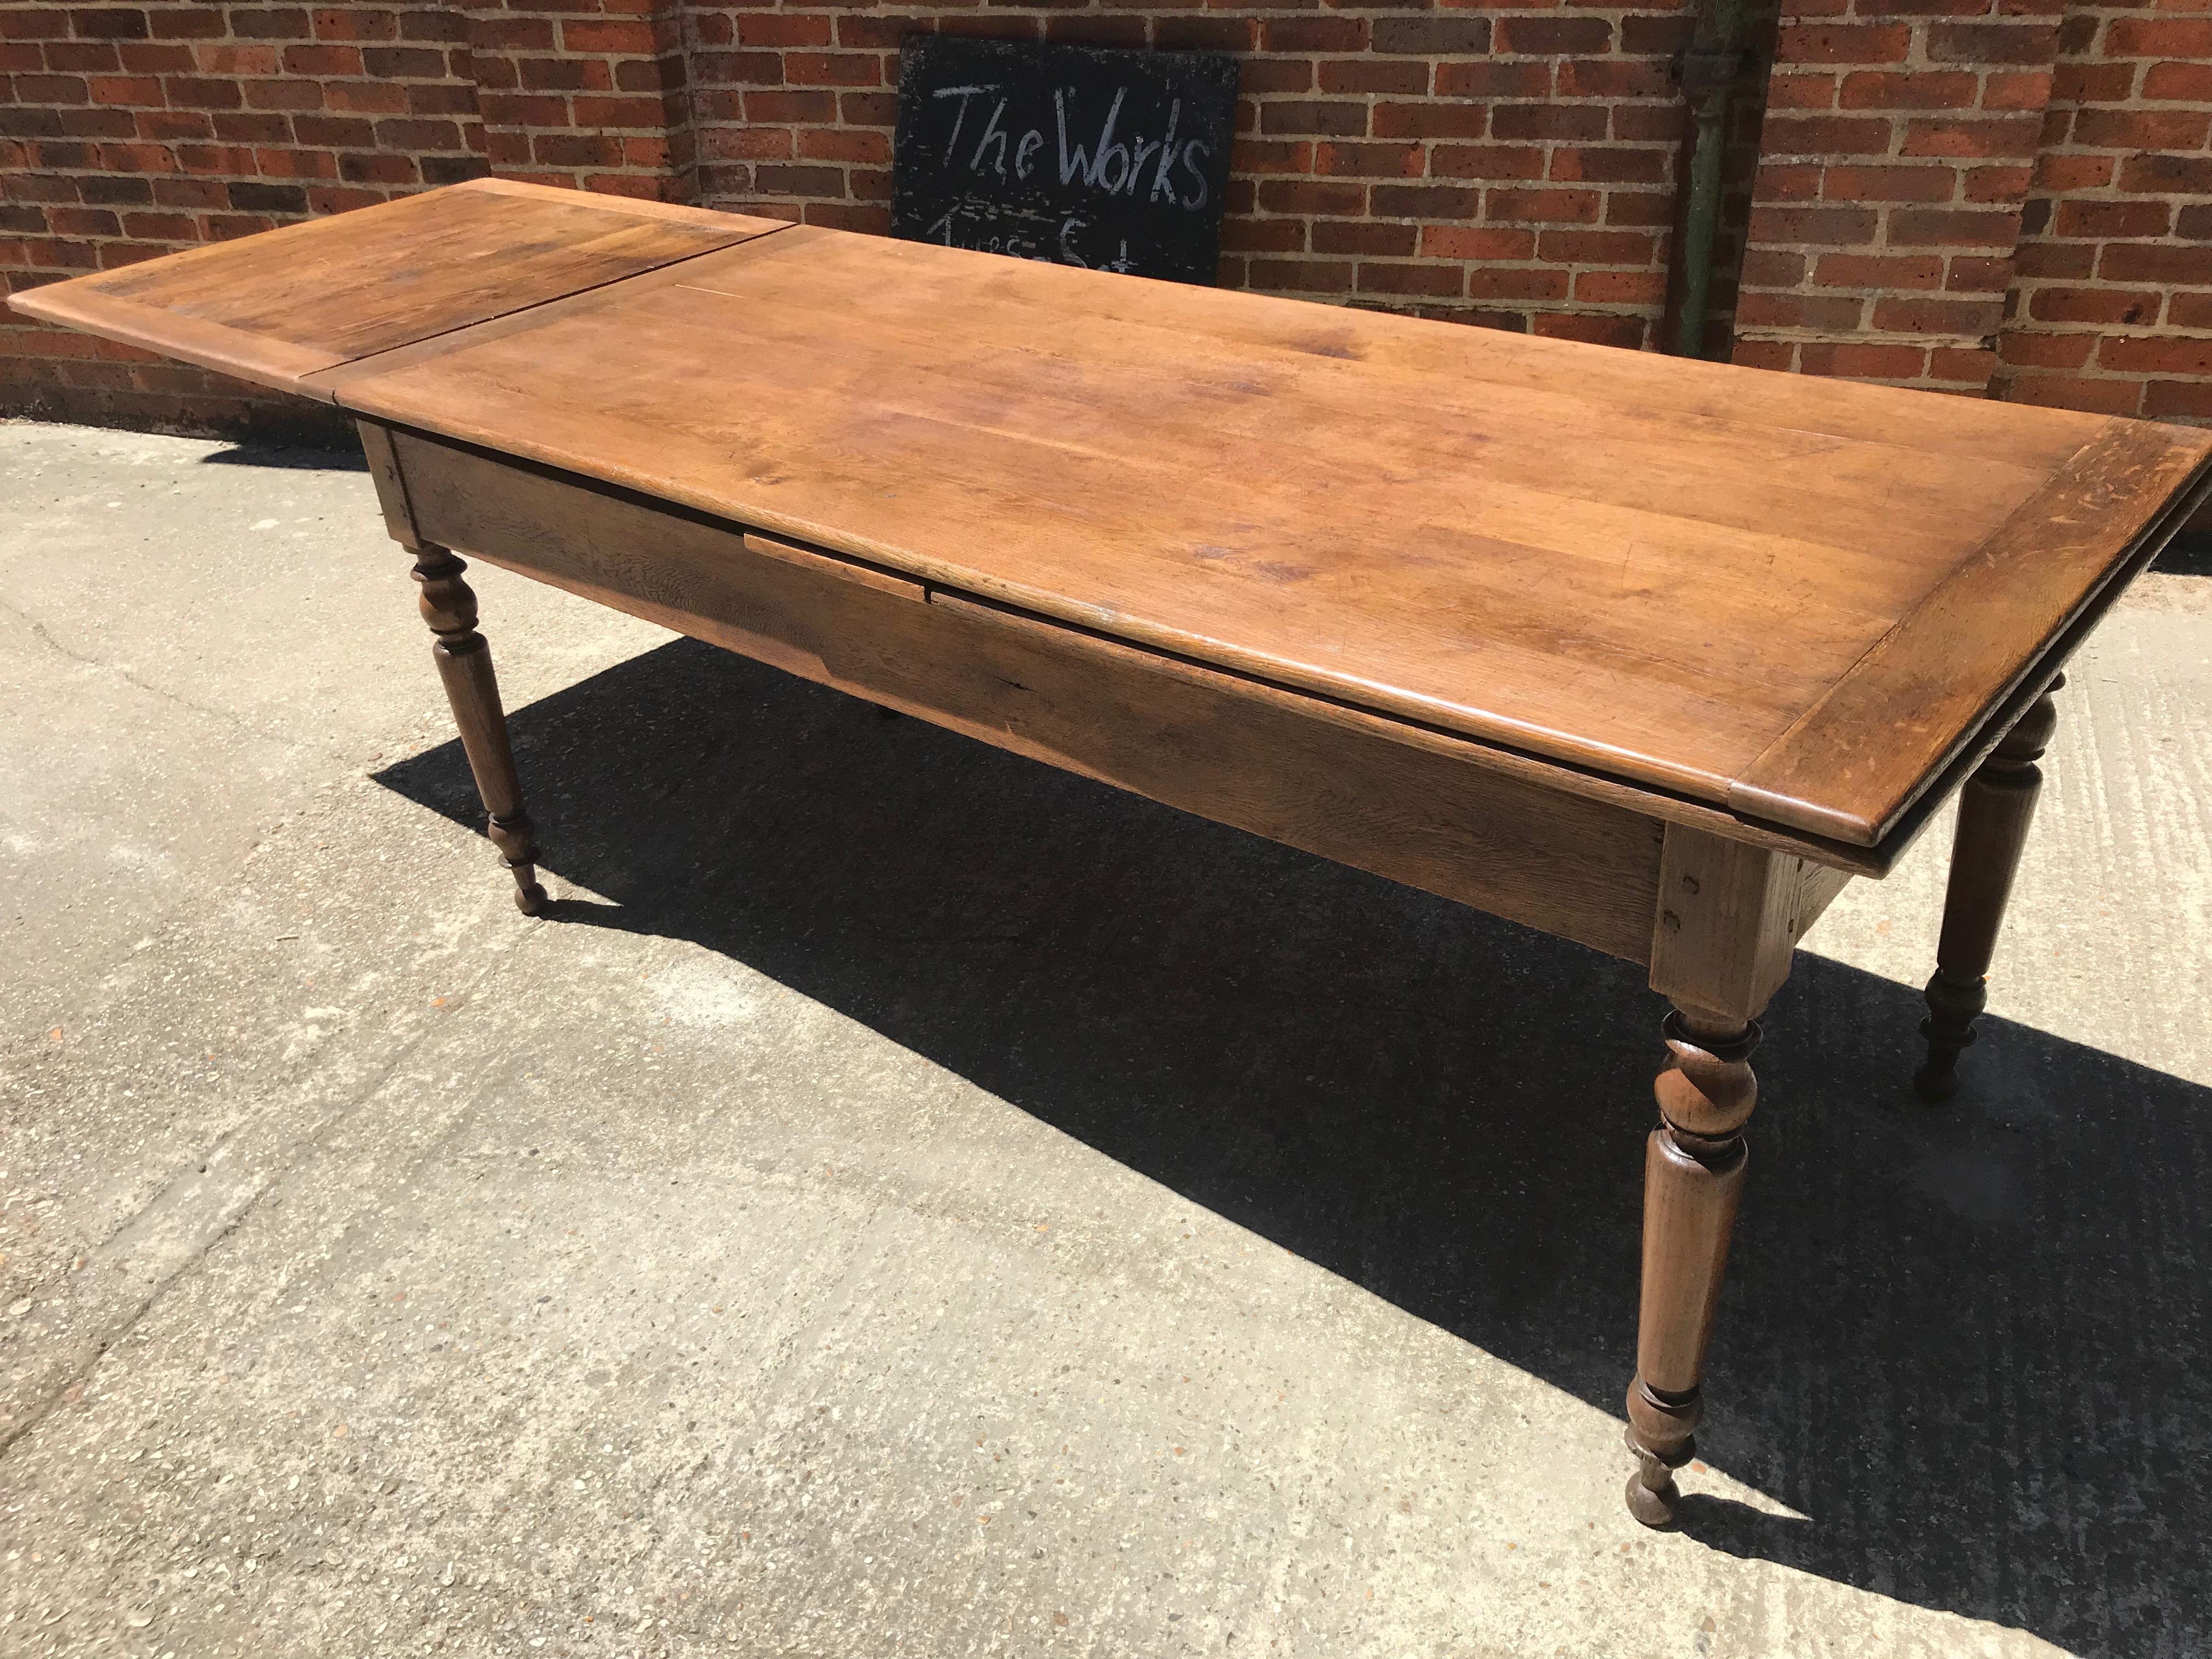 Antique oak double extending dining table with round legs and gorgeous patina. This table can extend on both sides and would seat up to 12 people comfortably. You can use this table as a eight-seat with both extensions tucked in, or with one